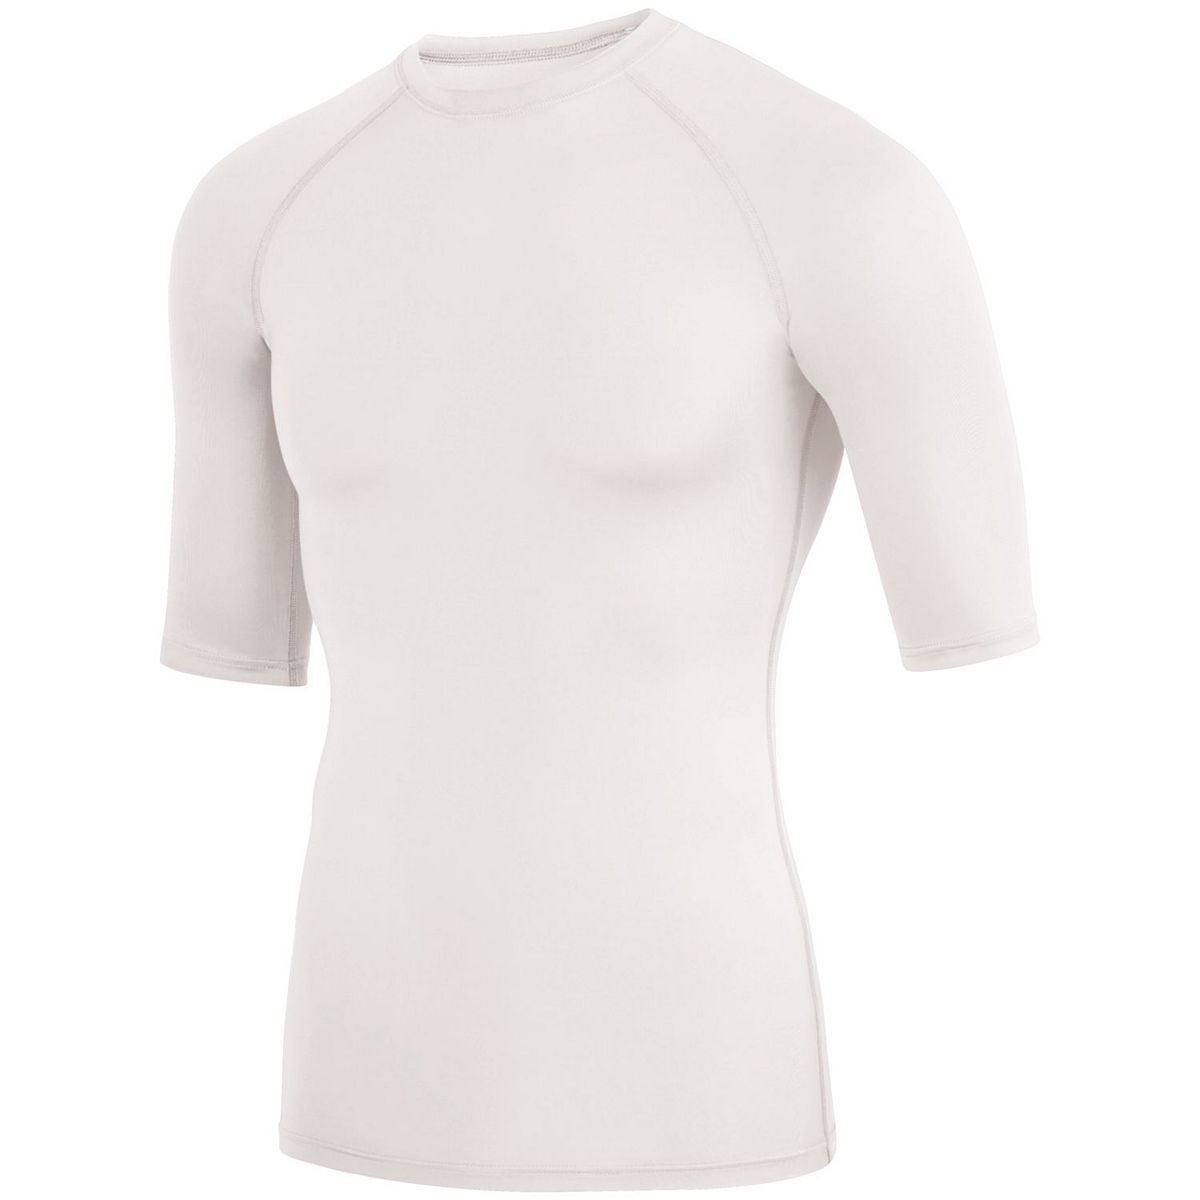 Augusta Sportswear Youth Hyperform Compression Half Sleeve Tee in White  -Part of the Youth, Youth-Tee-Shirt, T-Shirts, Augusta-Products, Shirts product lines at KanaleyCreations.com